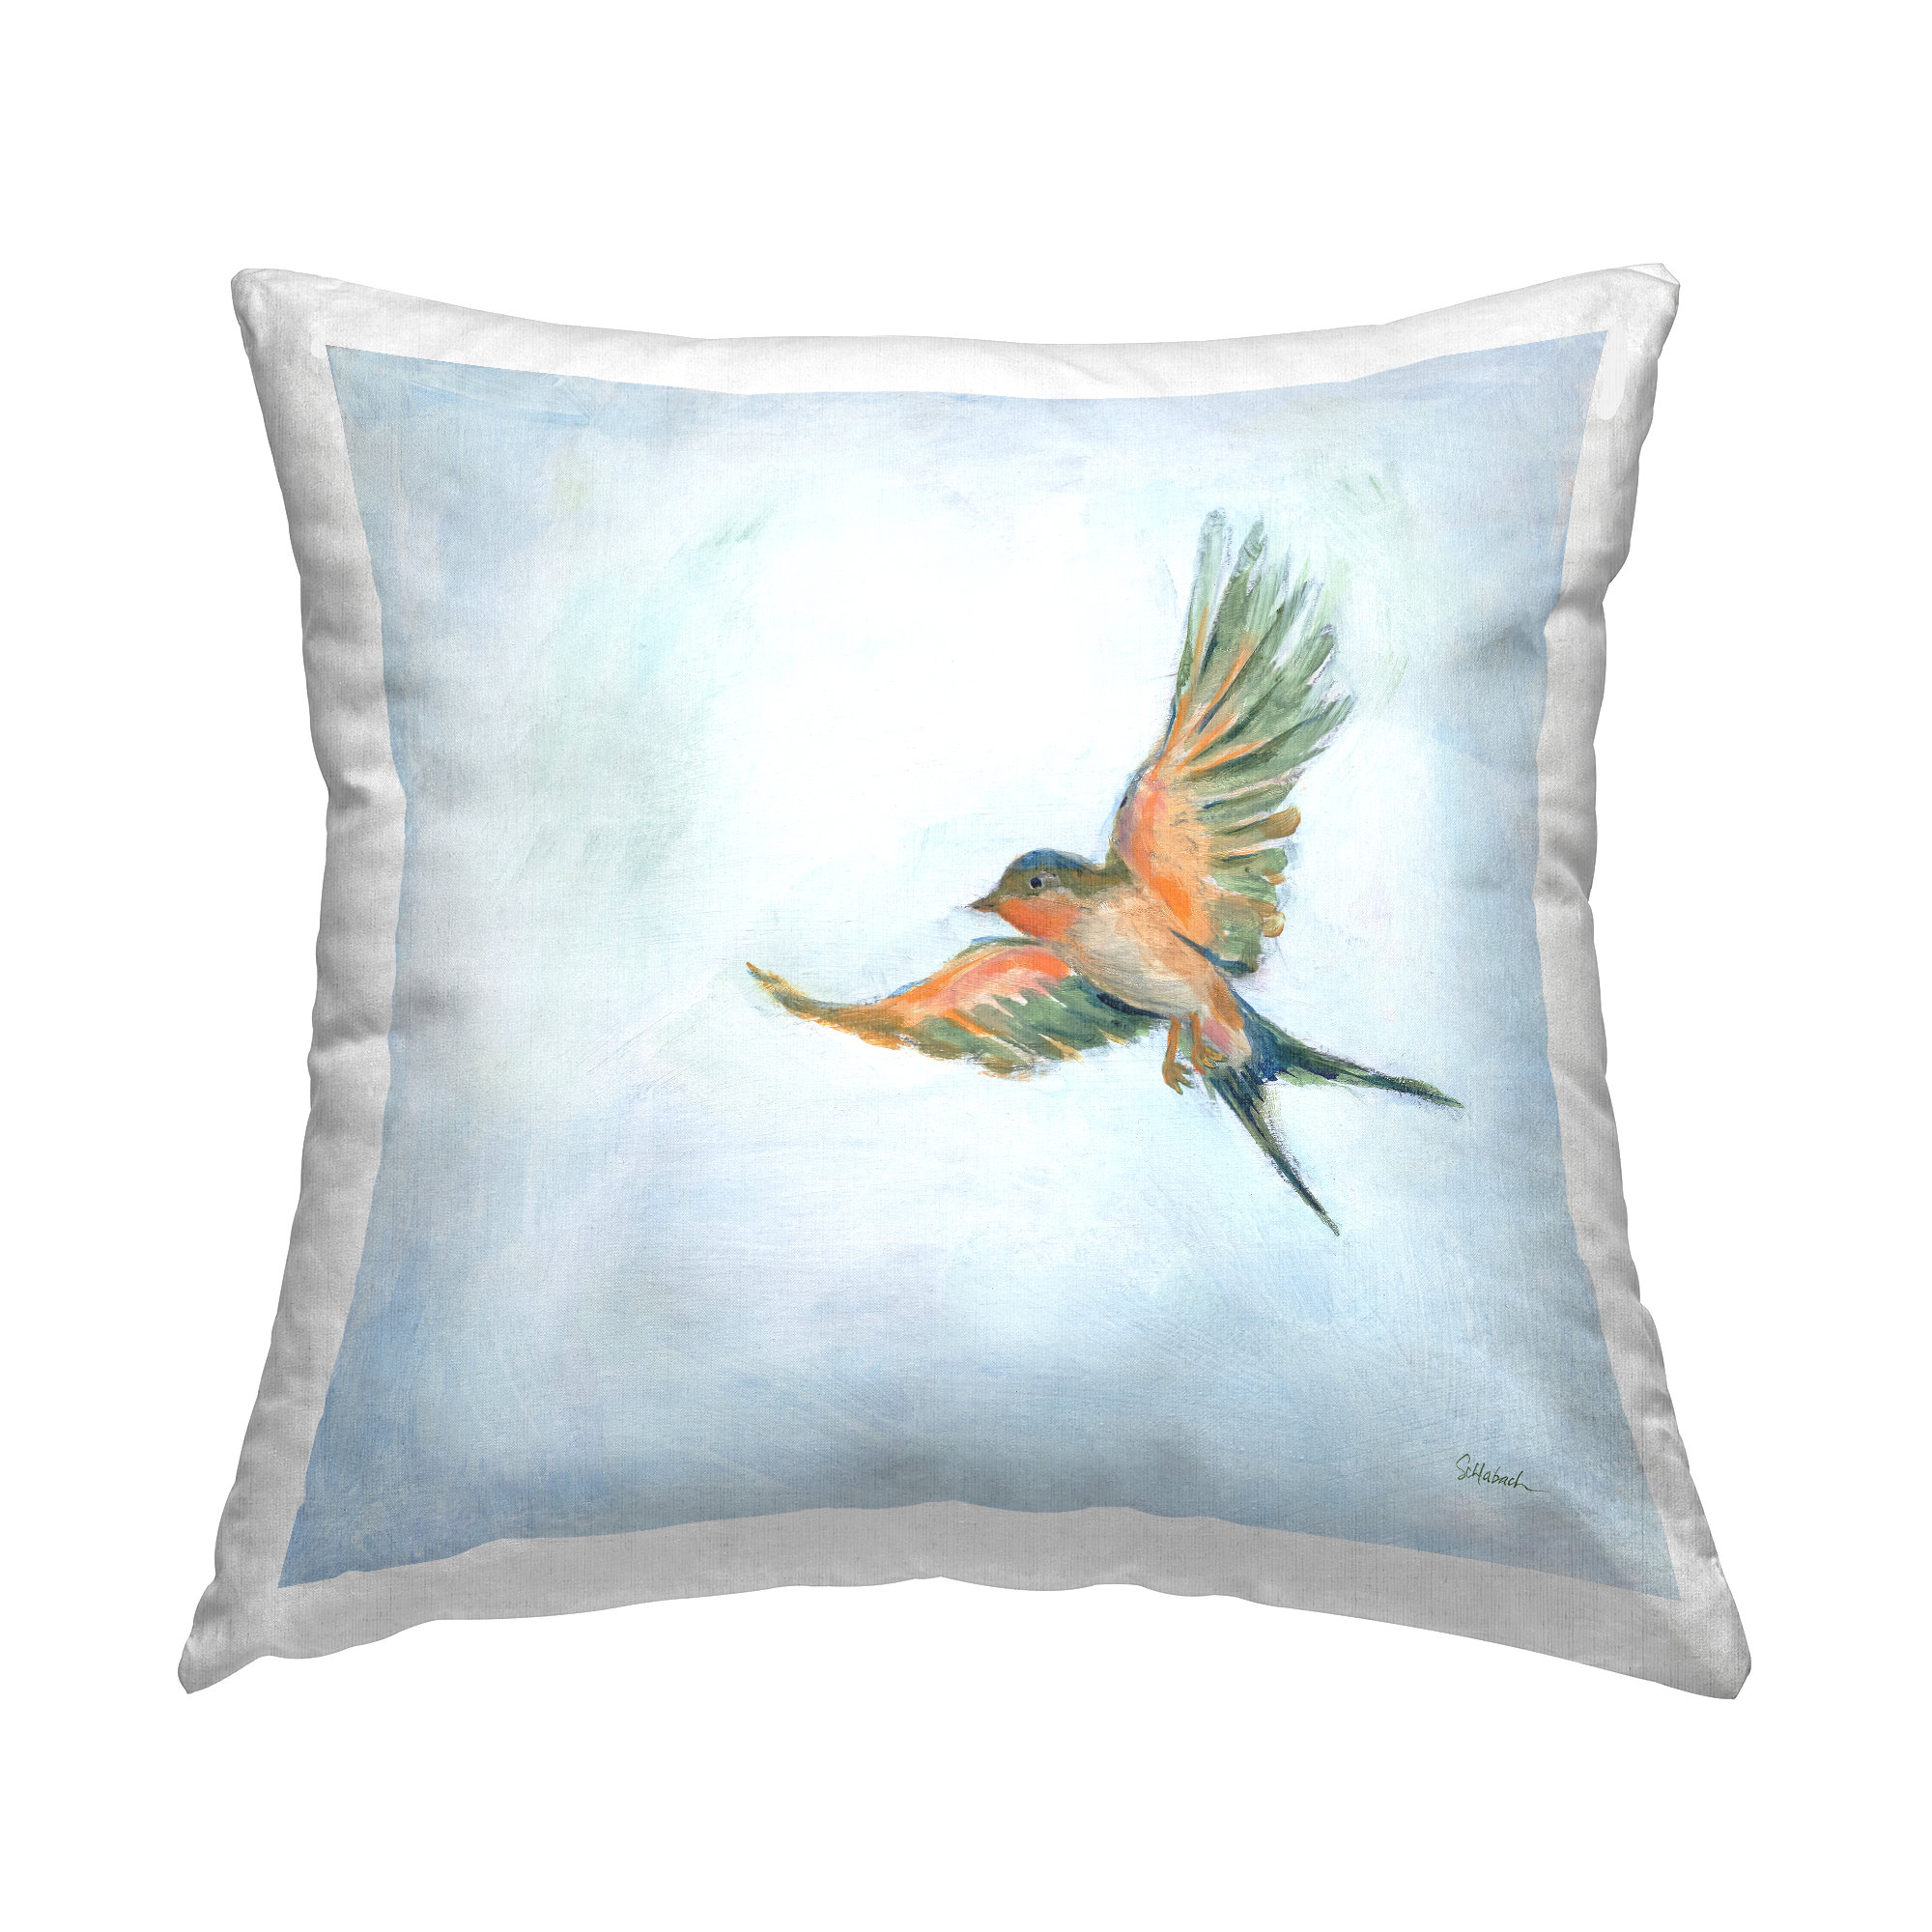 Bless international No Decorative Addition Polyester Throw Pillow